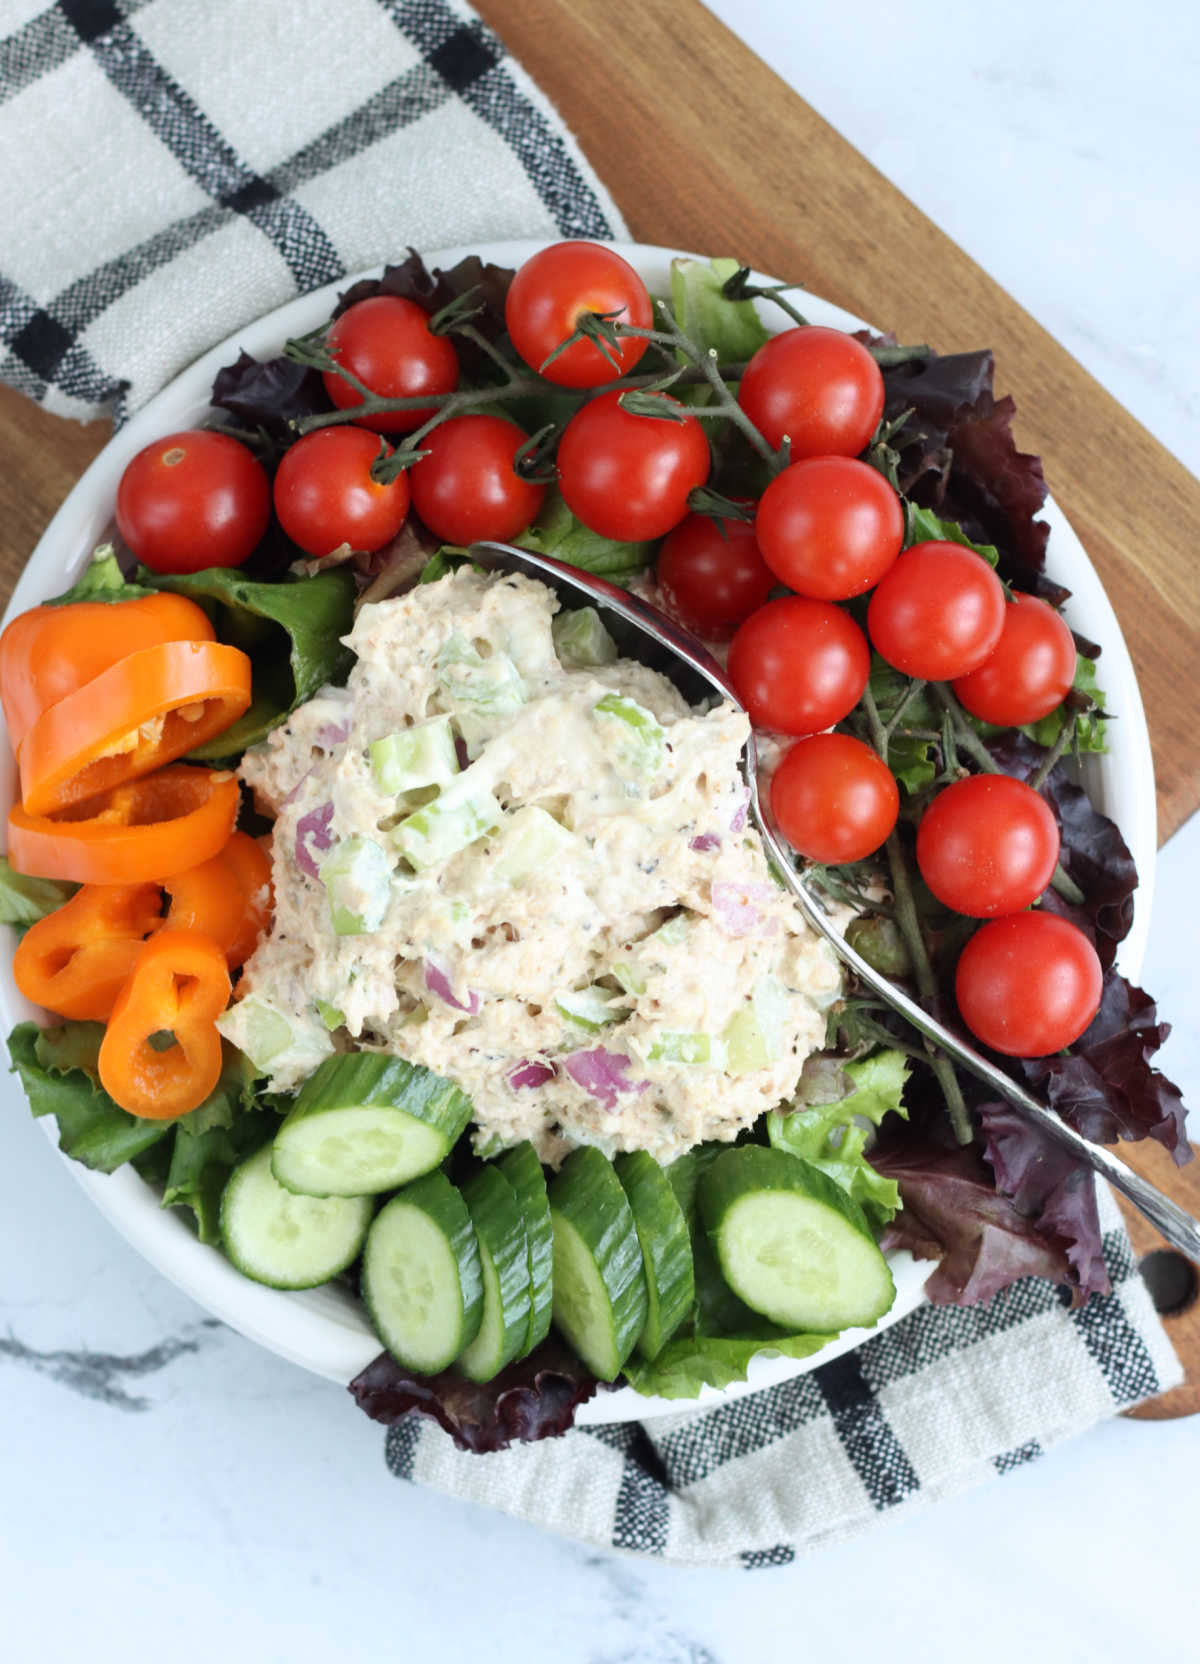 Scoop of tuna salad on small white plate of salad greens with cherry tomatoes, sliced cucumber and mini bell pepper.